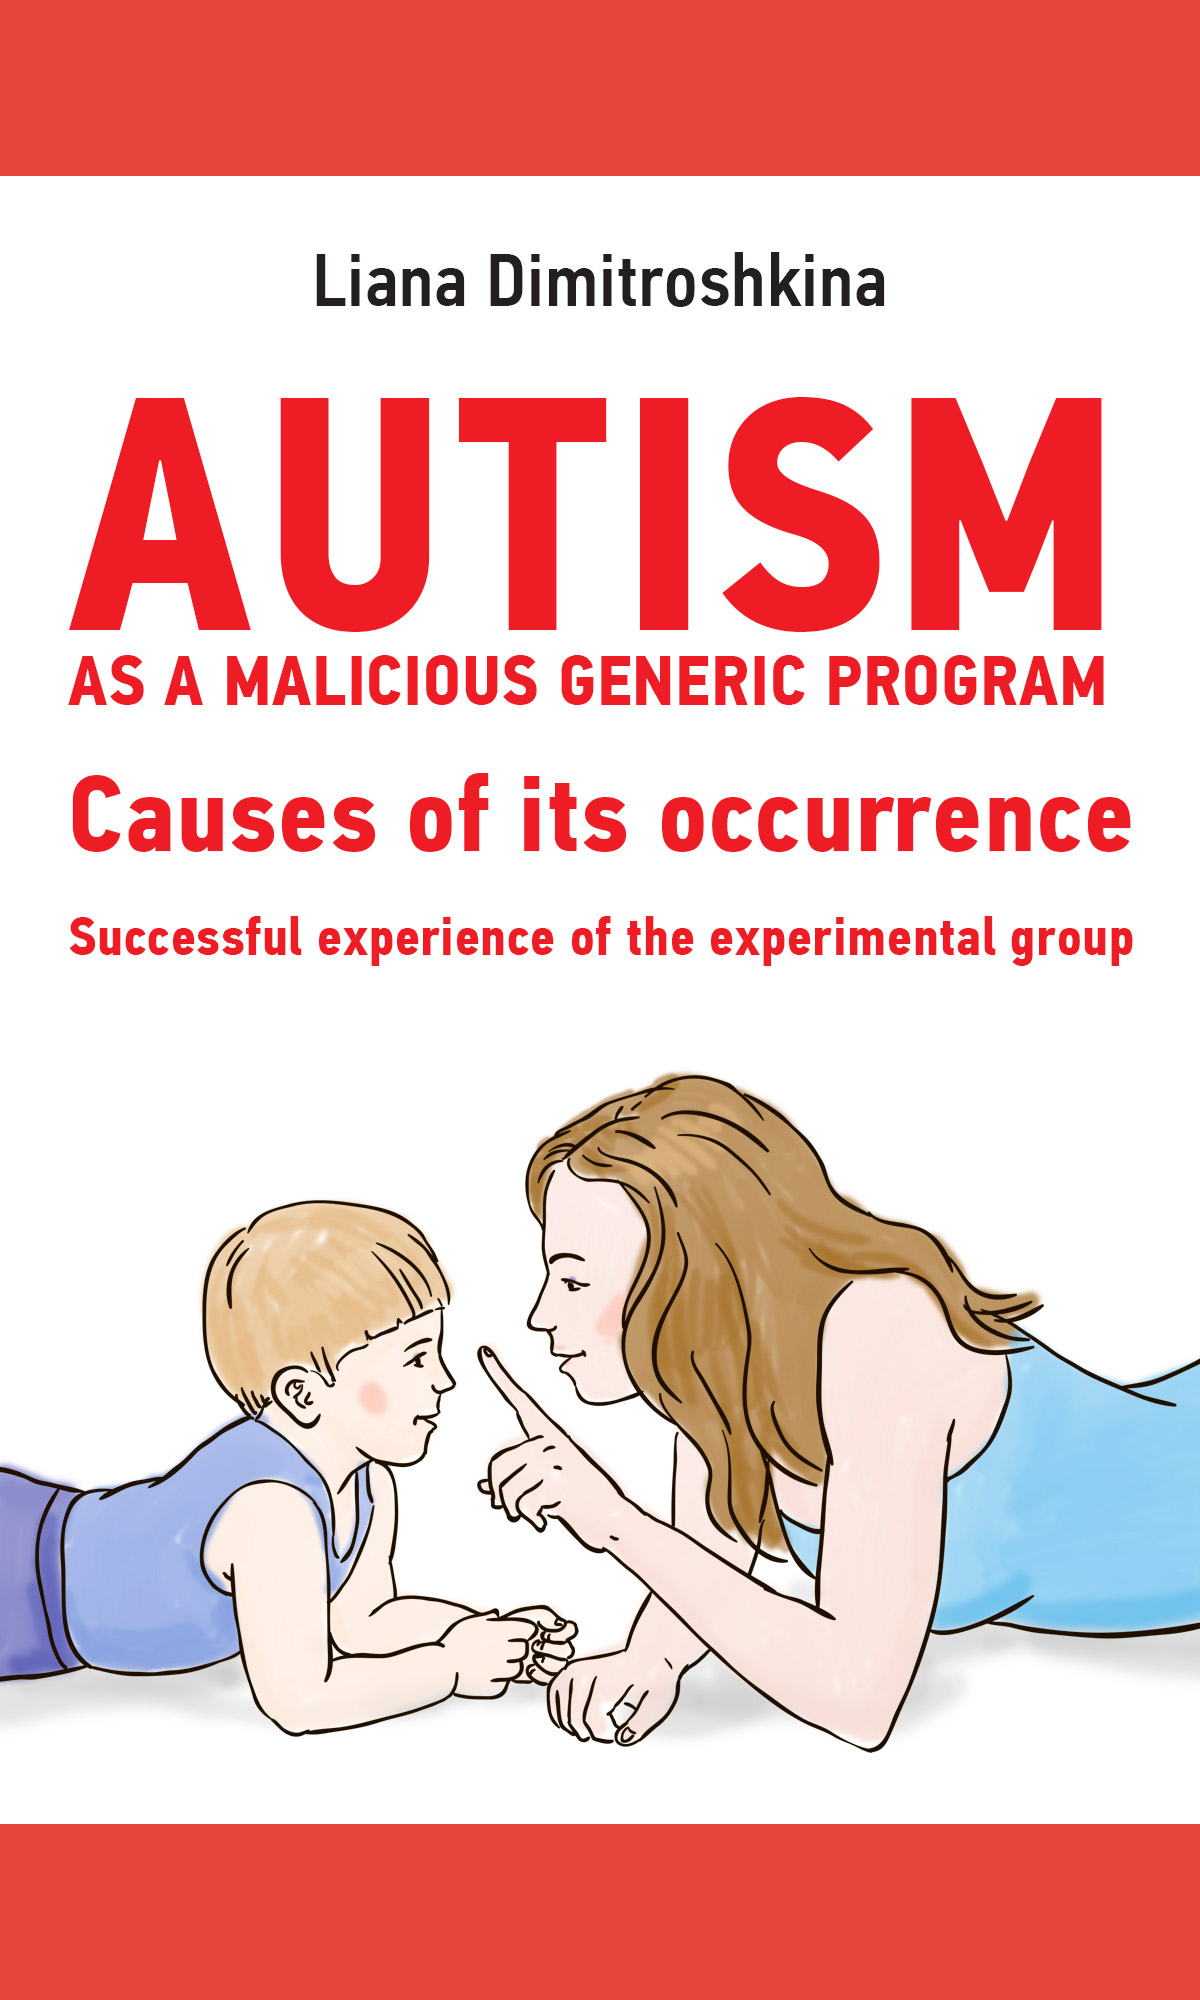 Autism as a malicious generic program. Causes of its occurrence. Successful experience of the experimental group